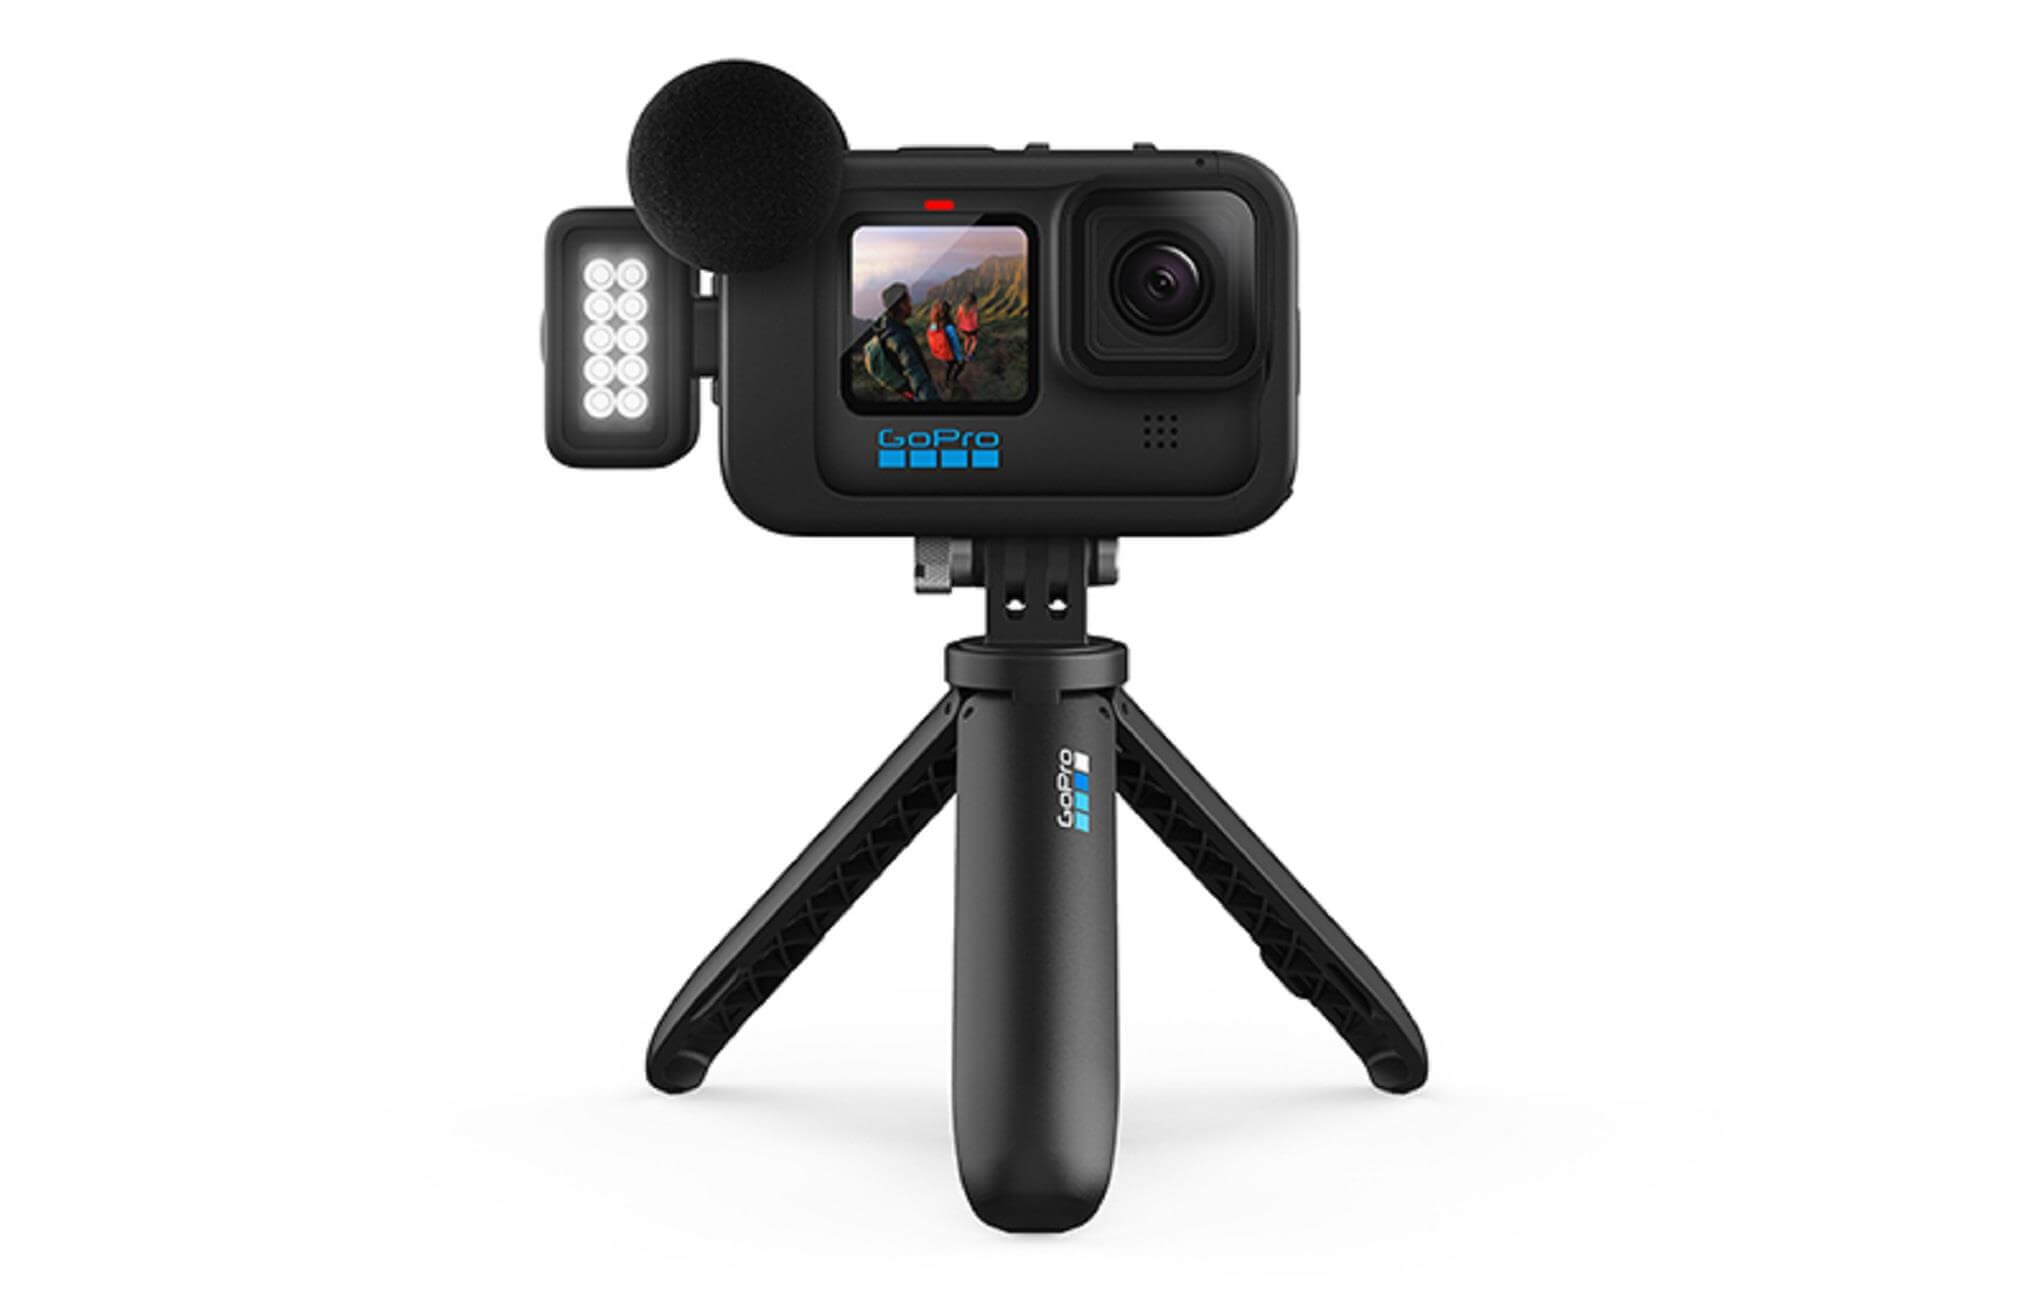 Would Go Pro Hero 4 be a good camera for Vlogging?